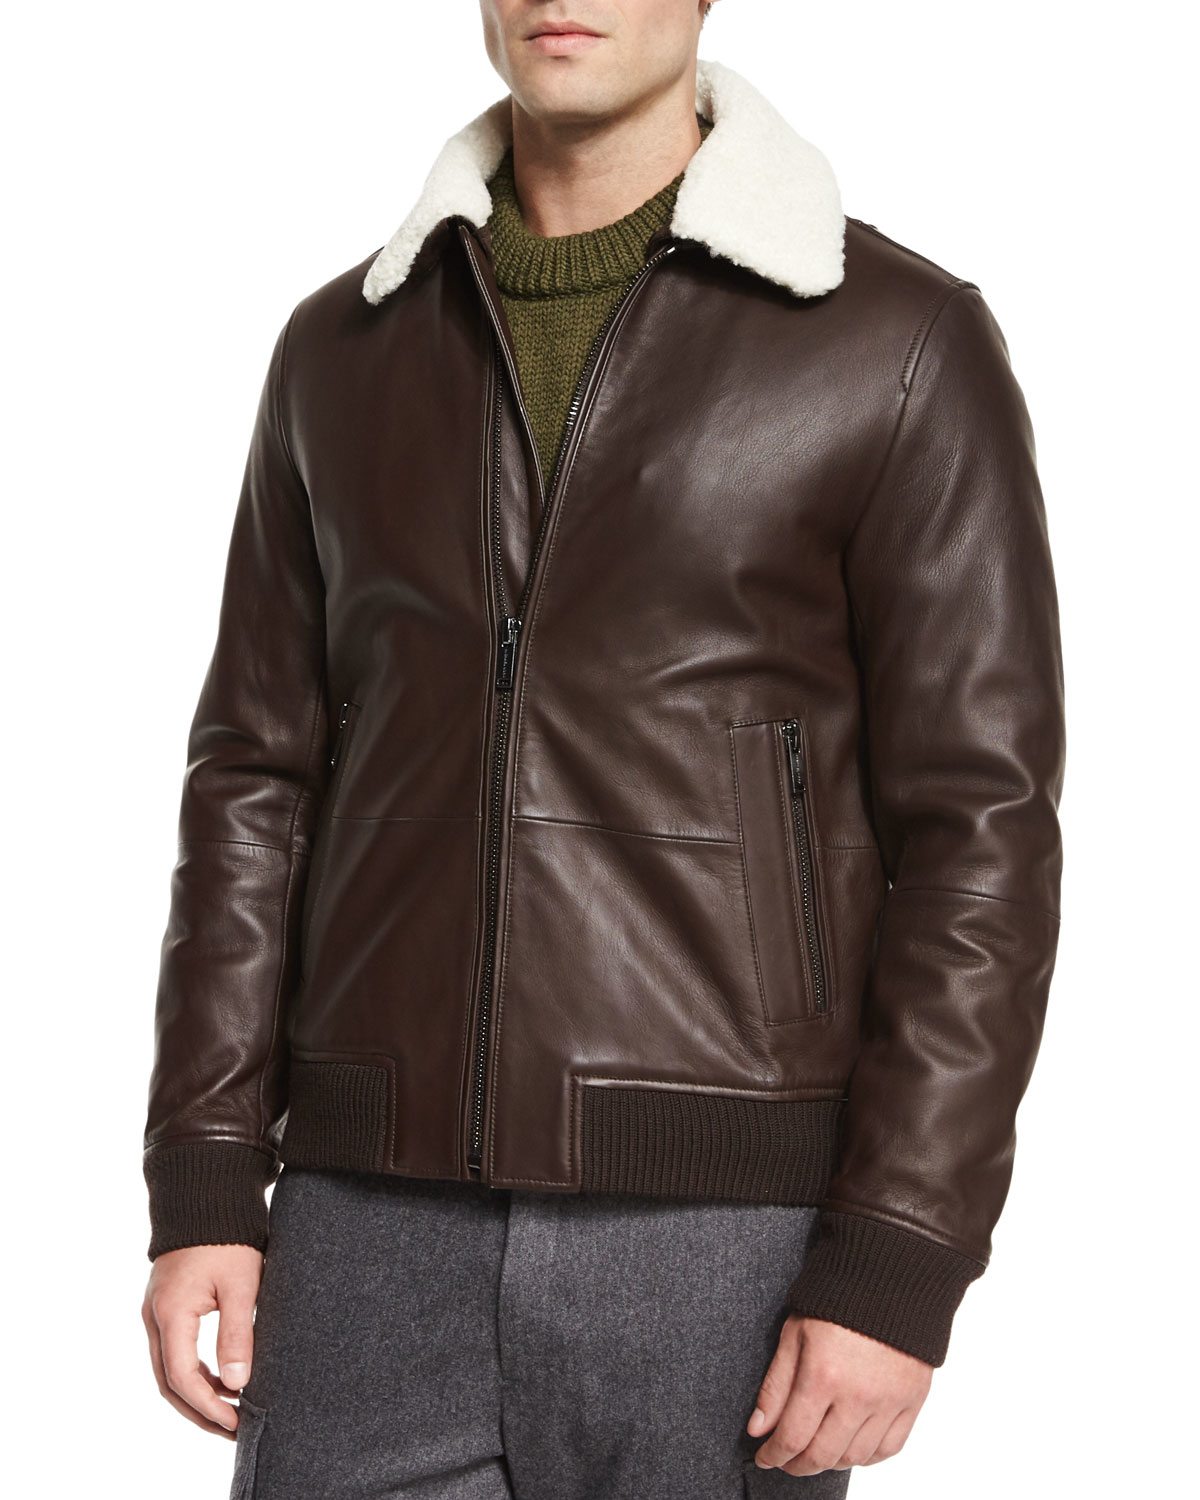 Lyst - Michael Kors Leather Jacket With Shearling Collar in Brown for Men